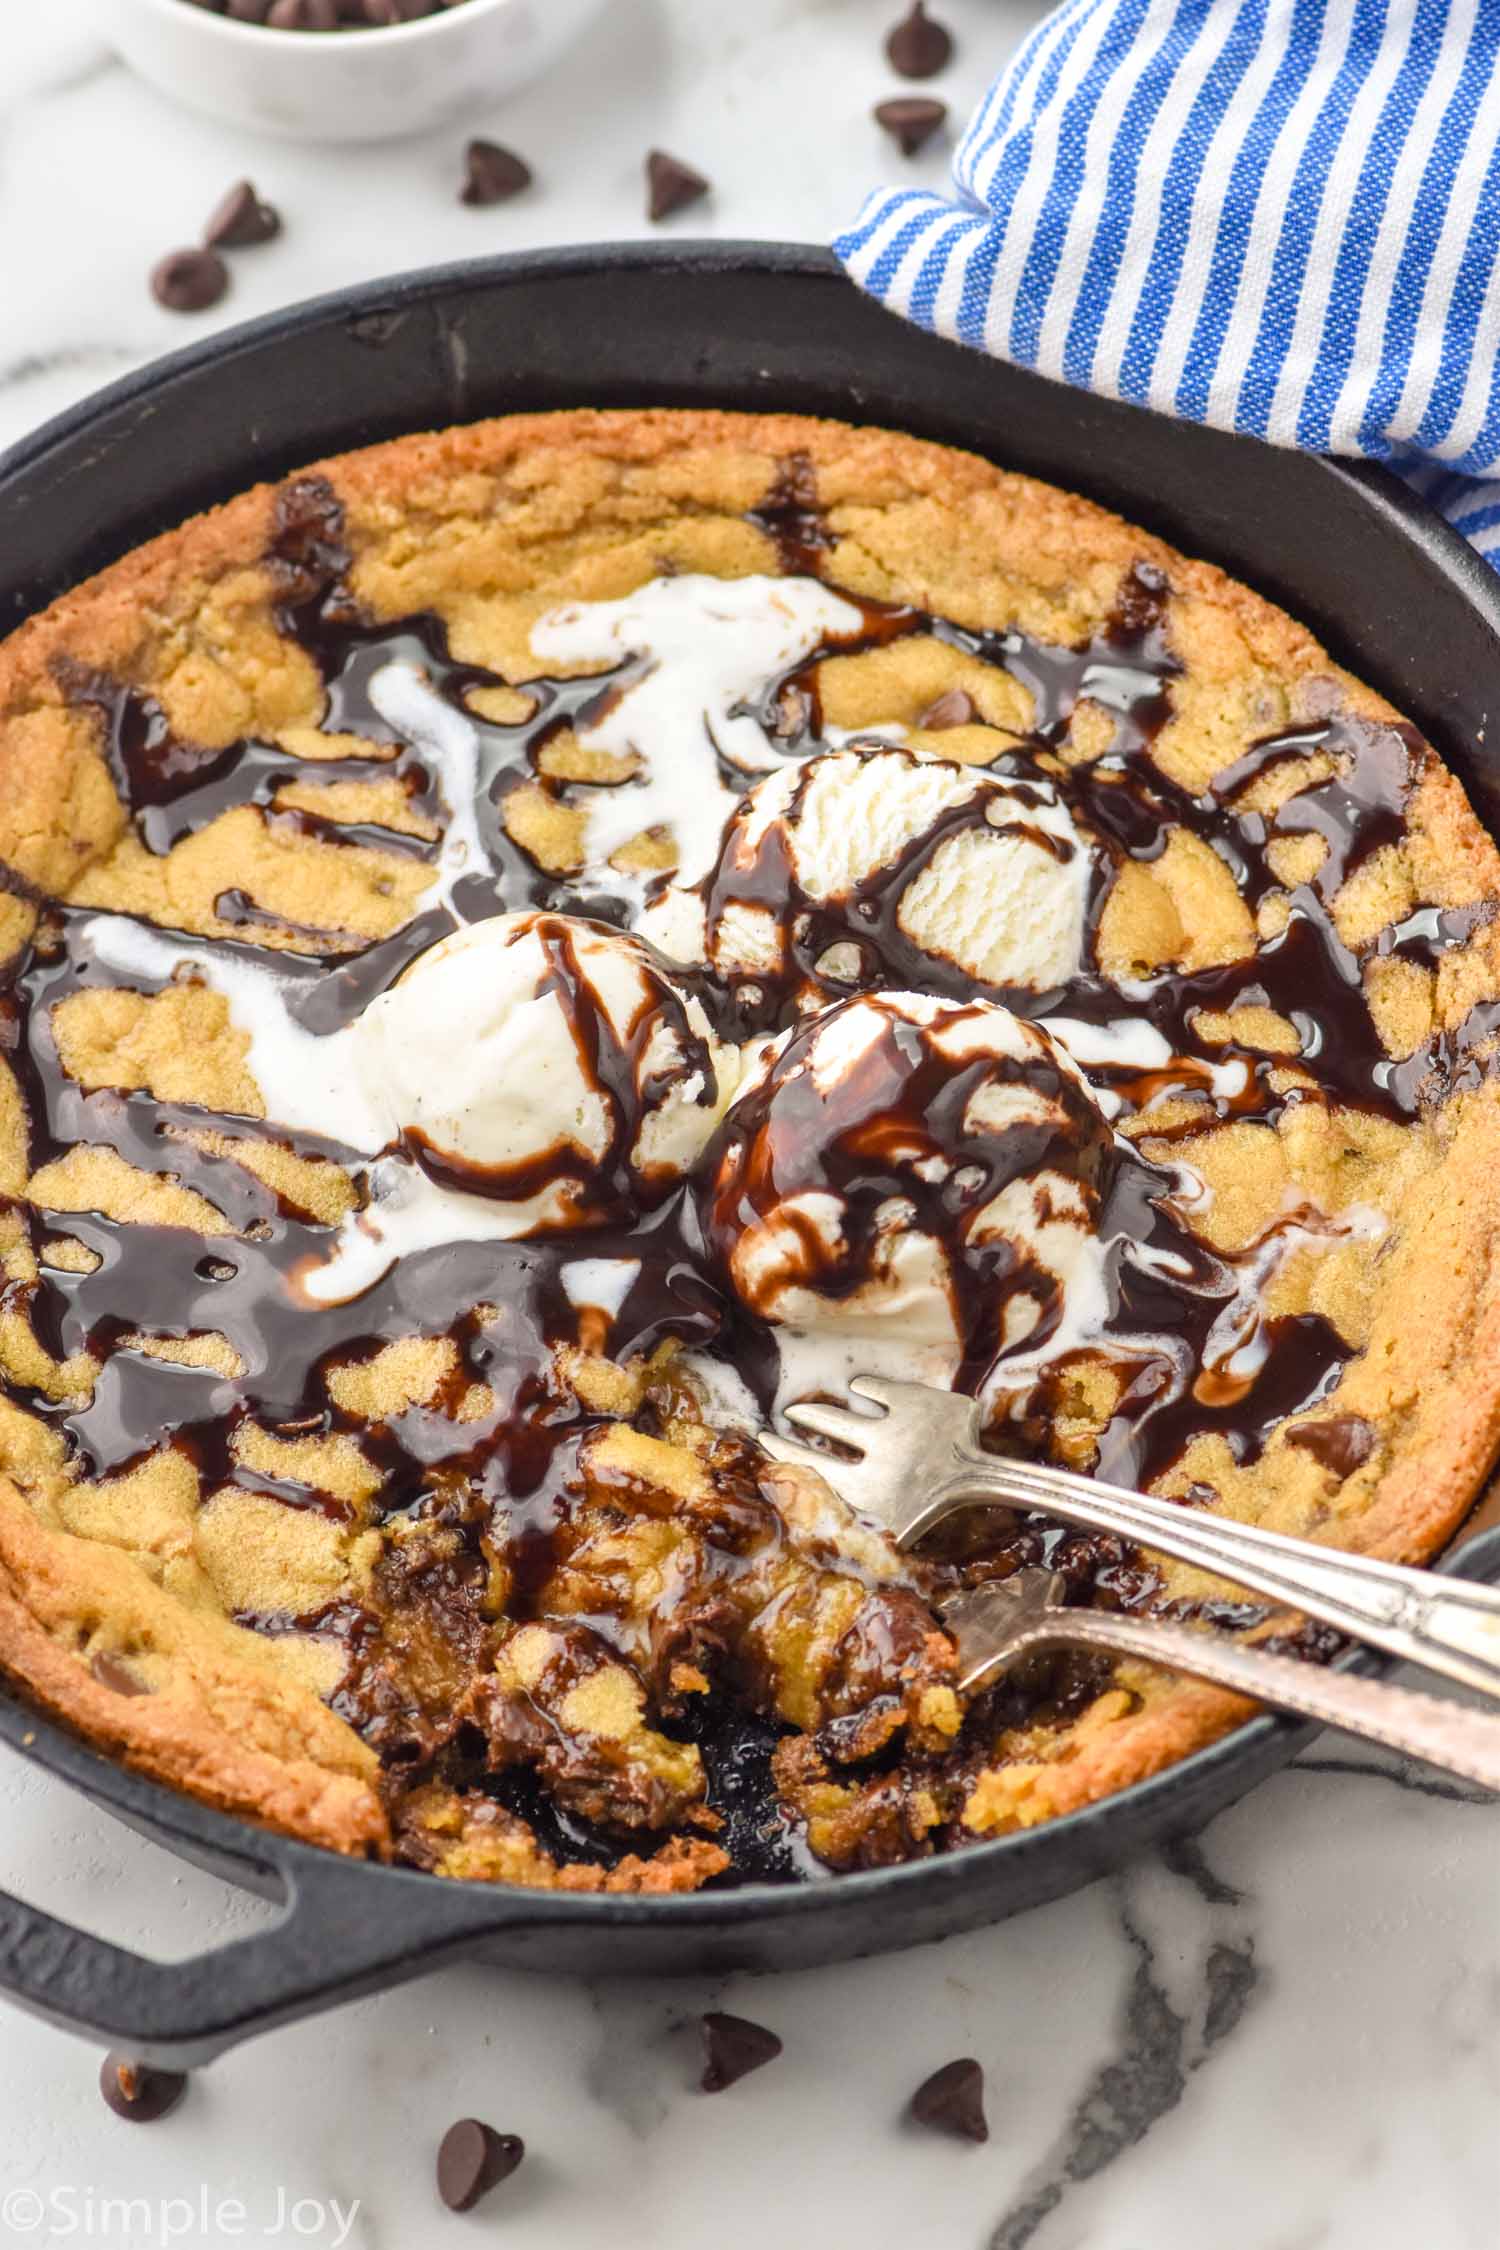 The BEST Homemade Pizookie (Pizza Cookie) - Rich And Delish